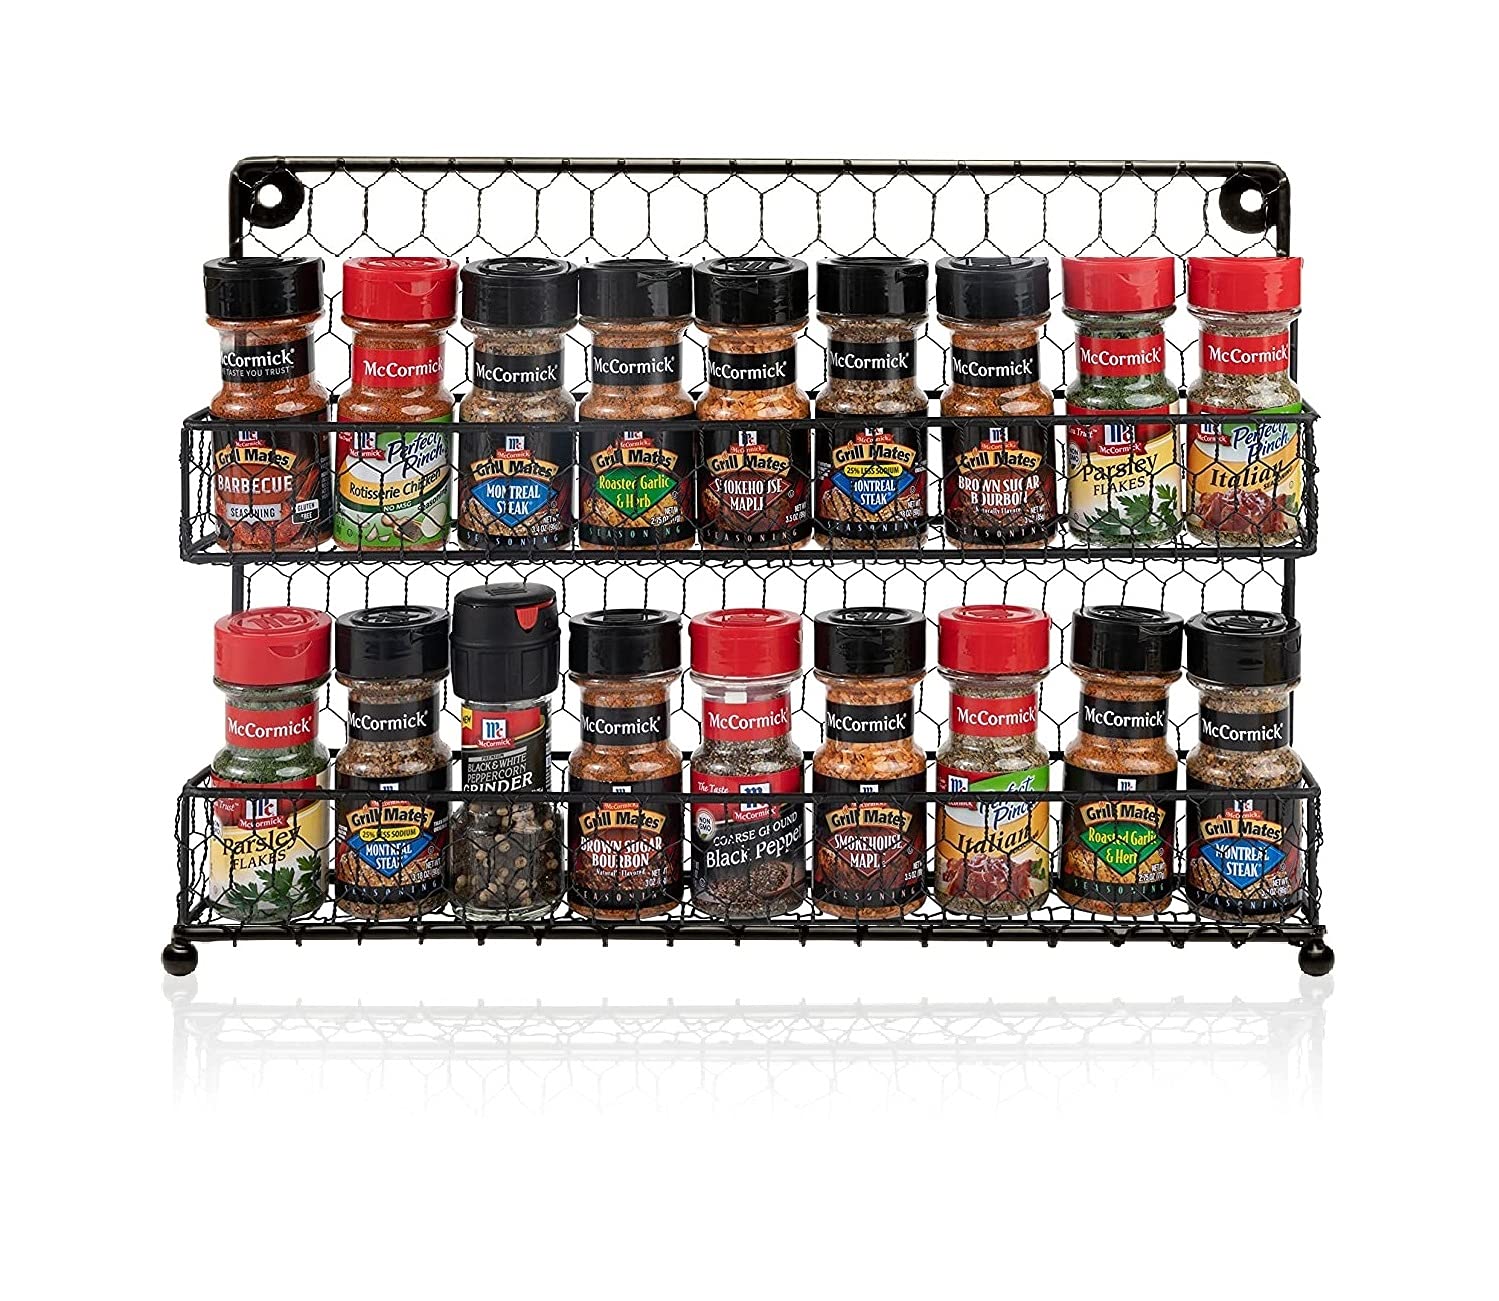 Homeries 2 Tier Wall Spice Rack For Kitchens | Stylish Wall Mounted Spices And Seasonings Storage Rack | Organize Your Home,  - Very Good